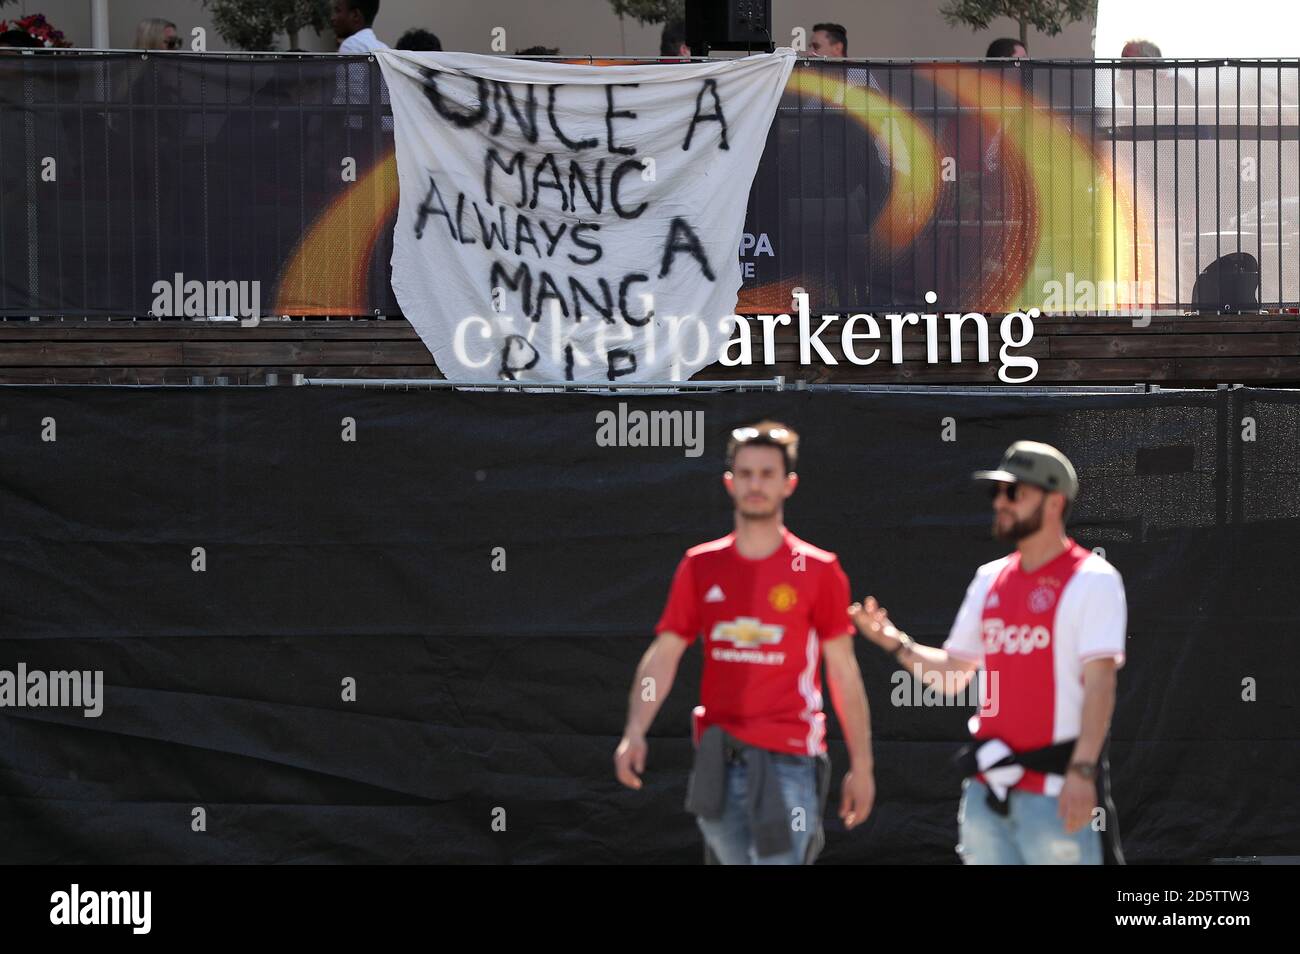 A banner reads 'Once A Manc Always a Manc R.I.P' ahead of the UEFA Europa League Final in Stockholm Stock Photo